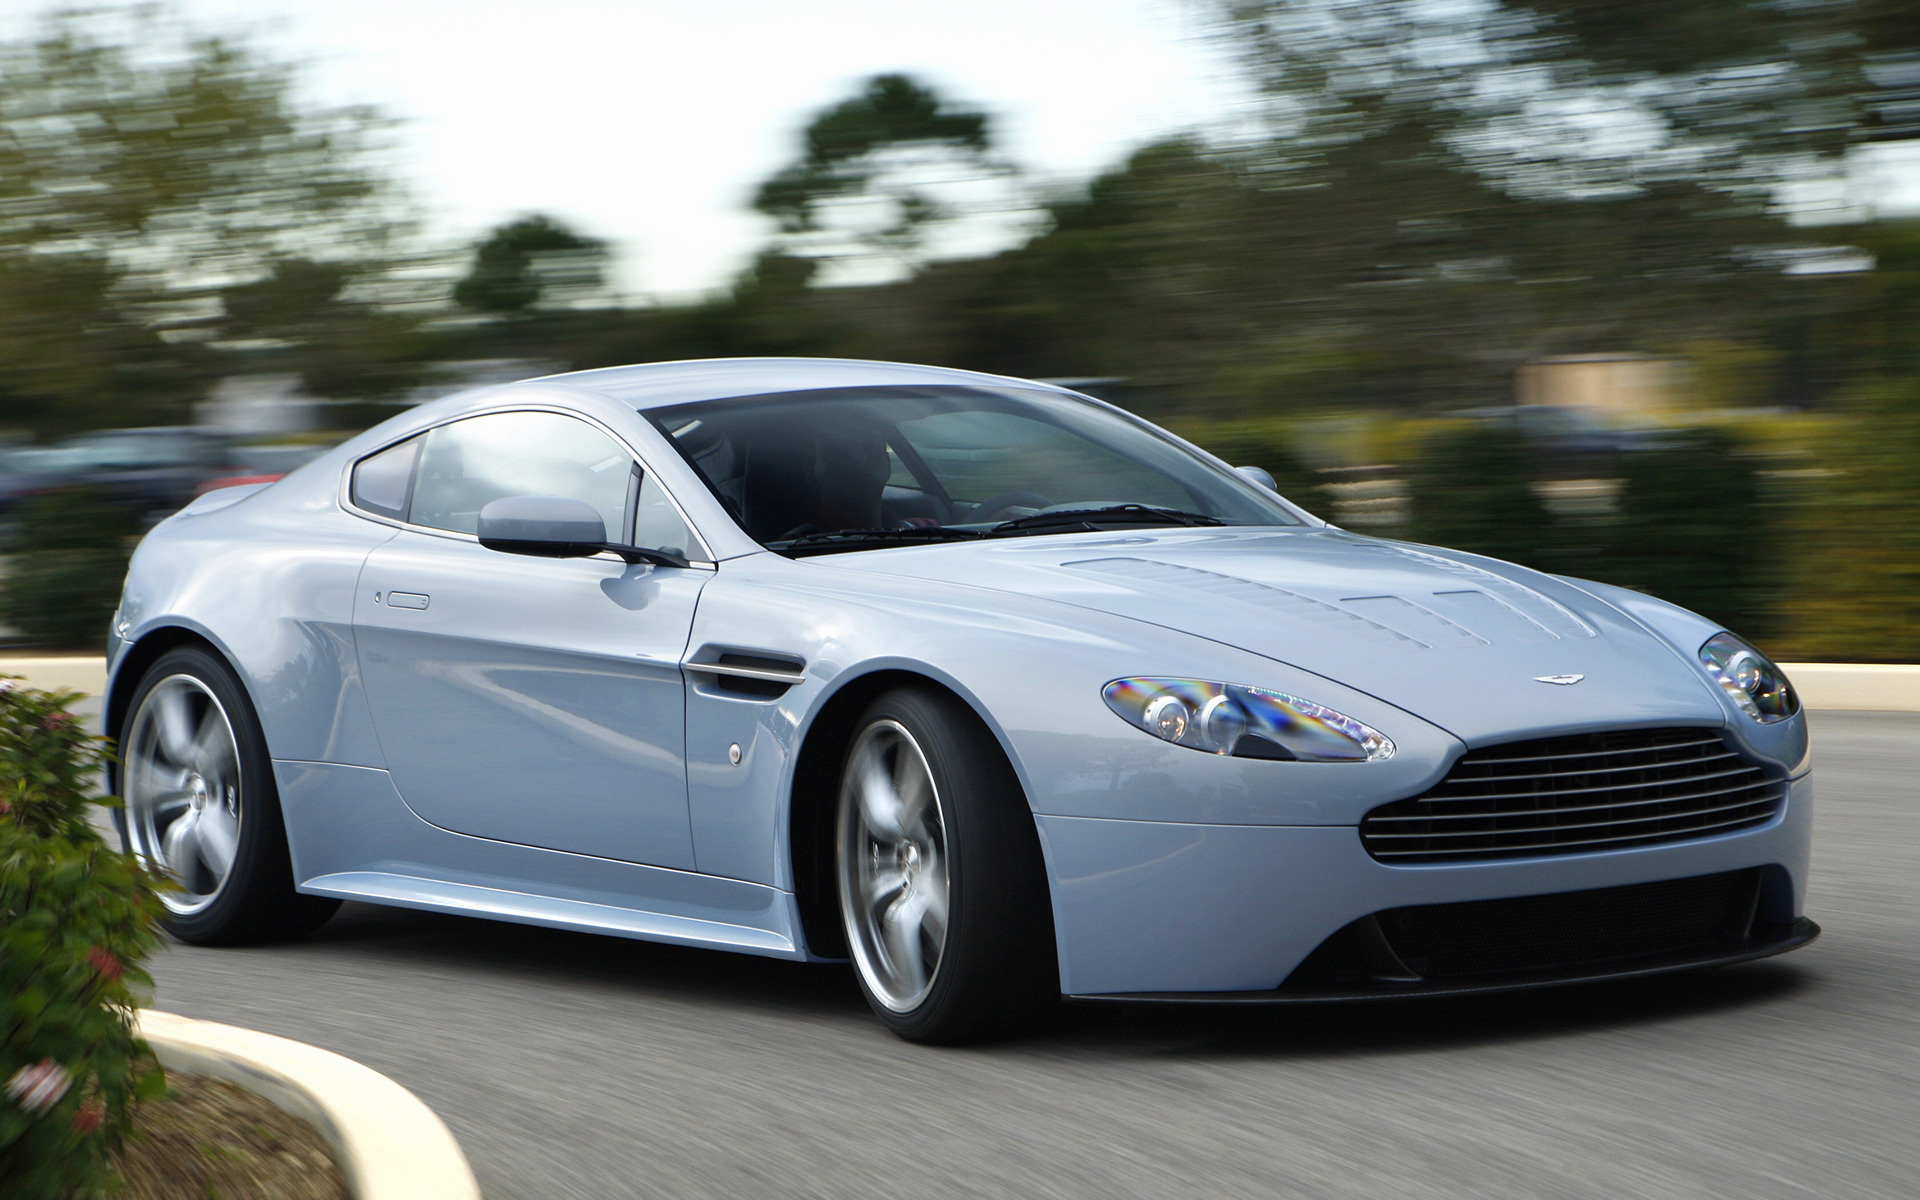 2007 Aston Martin V12 Vantage RS Concept - Wallpapers and HD Images ...